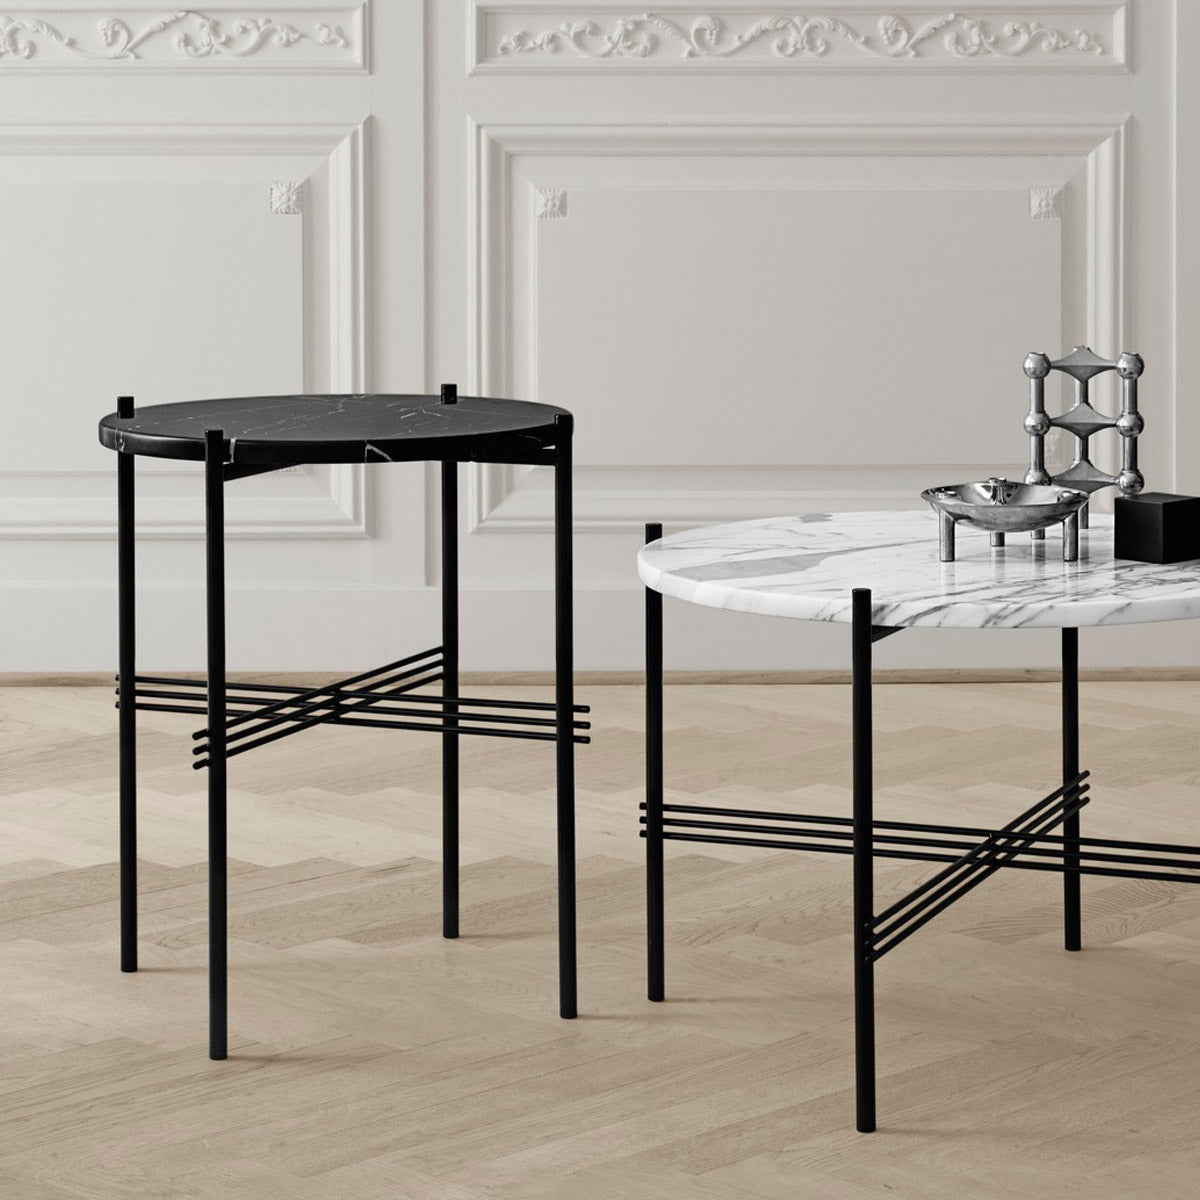 TS Side Table φ40 Brass / Black Marquina Marble